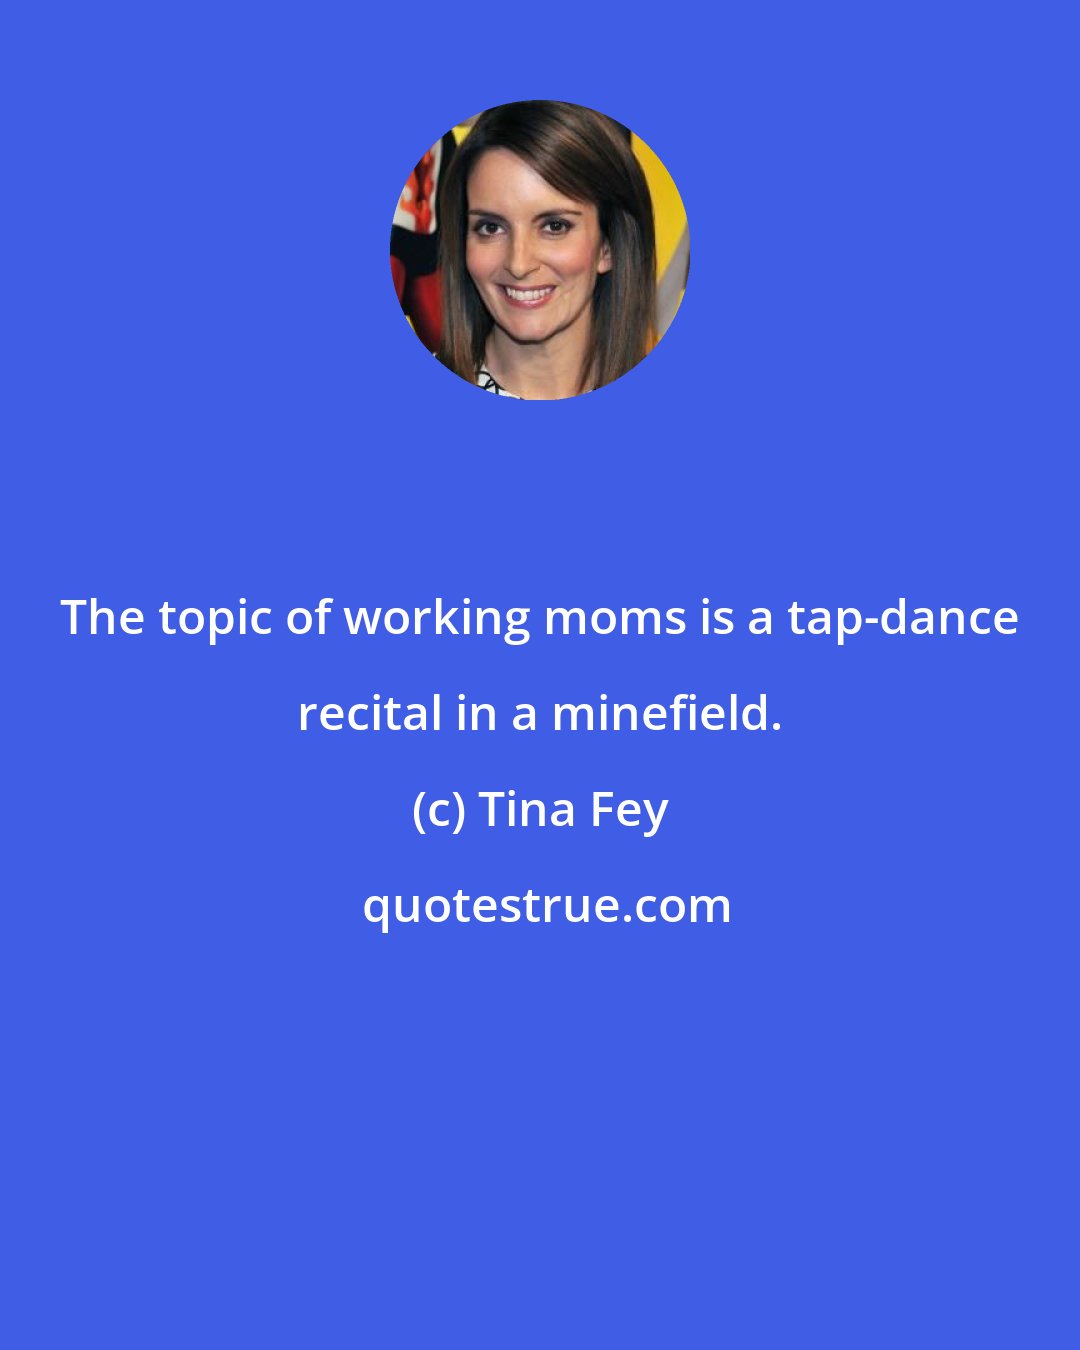 Tina Fey: The topic of working moms is a tap-dance recital in a minefield.